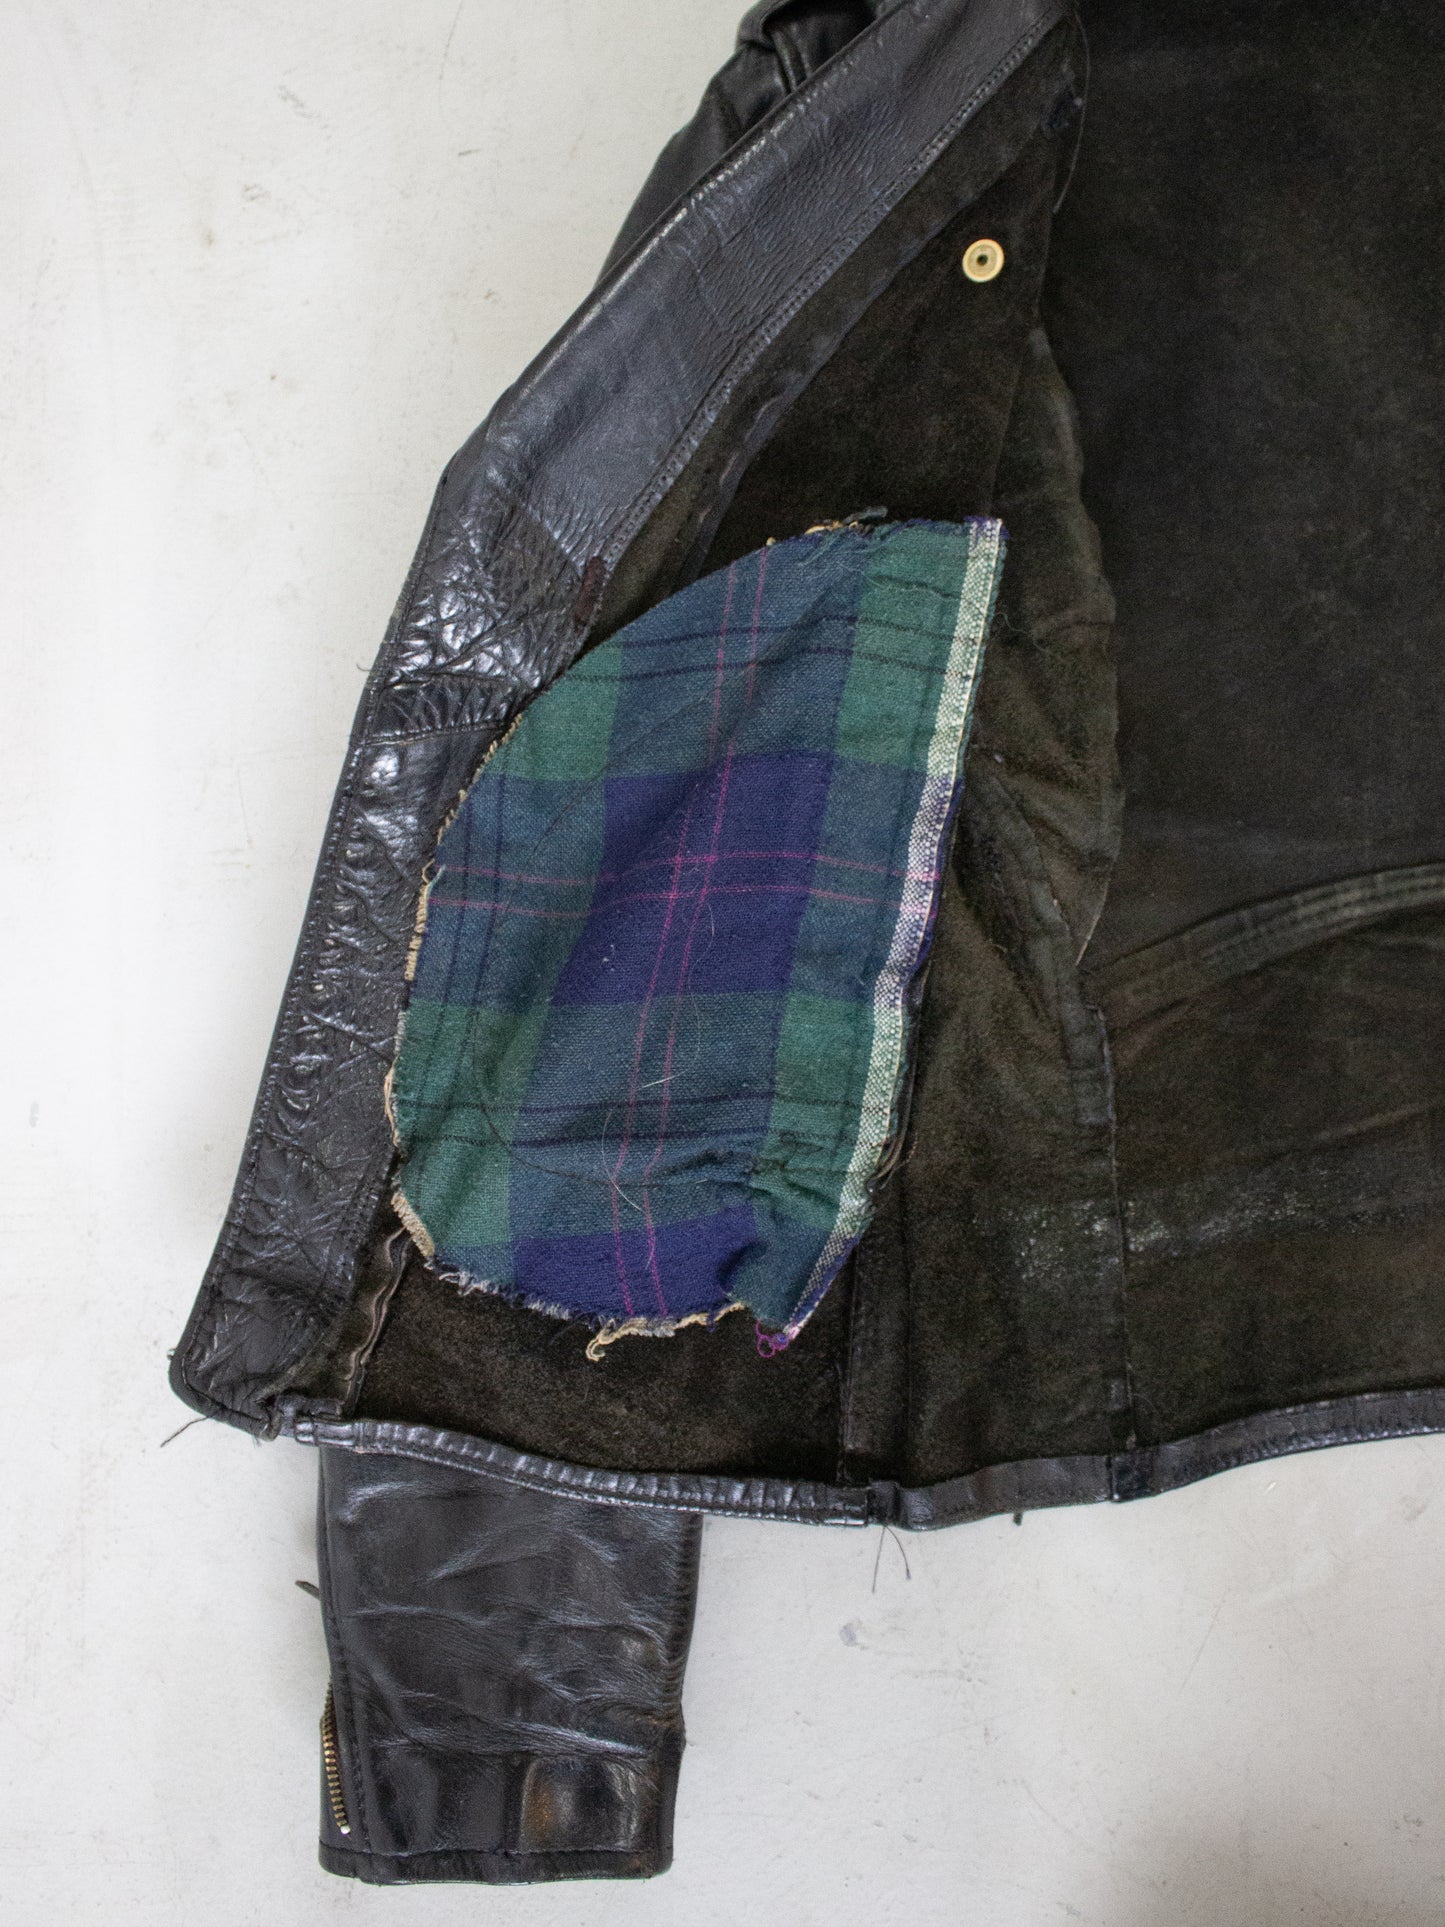 1980's Branded of Queens W-Style Black Cowhide Moto Jacket Made in New York USA (Men's Medium)